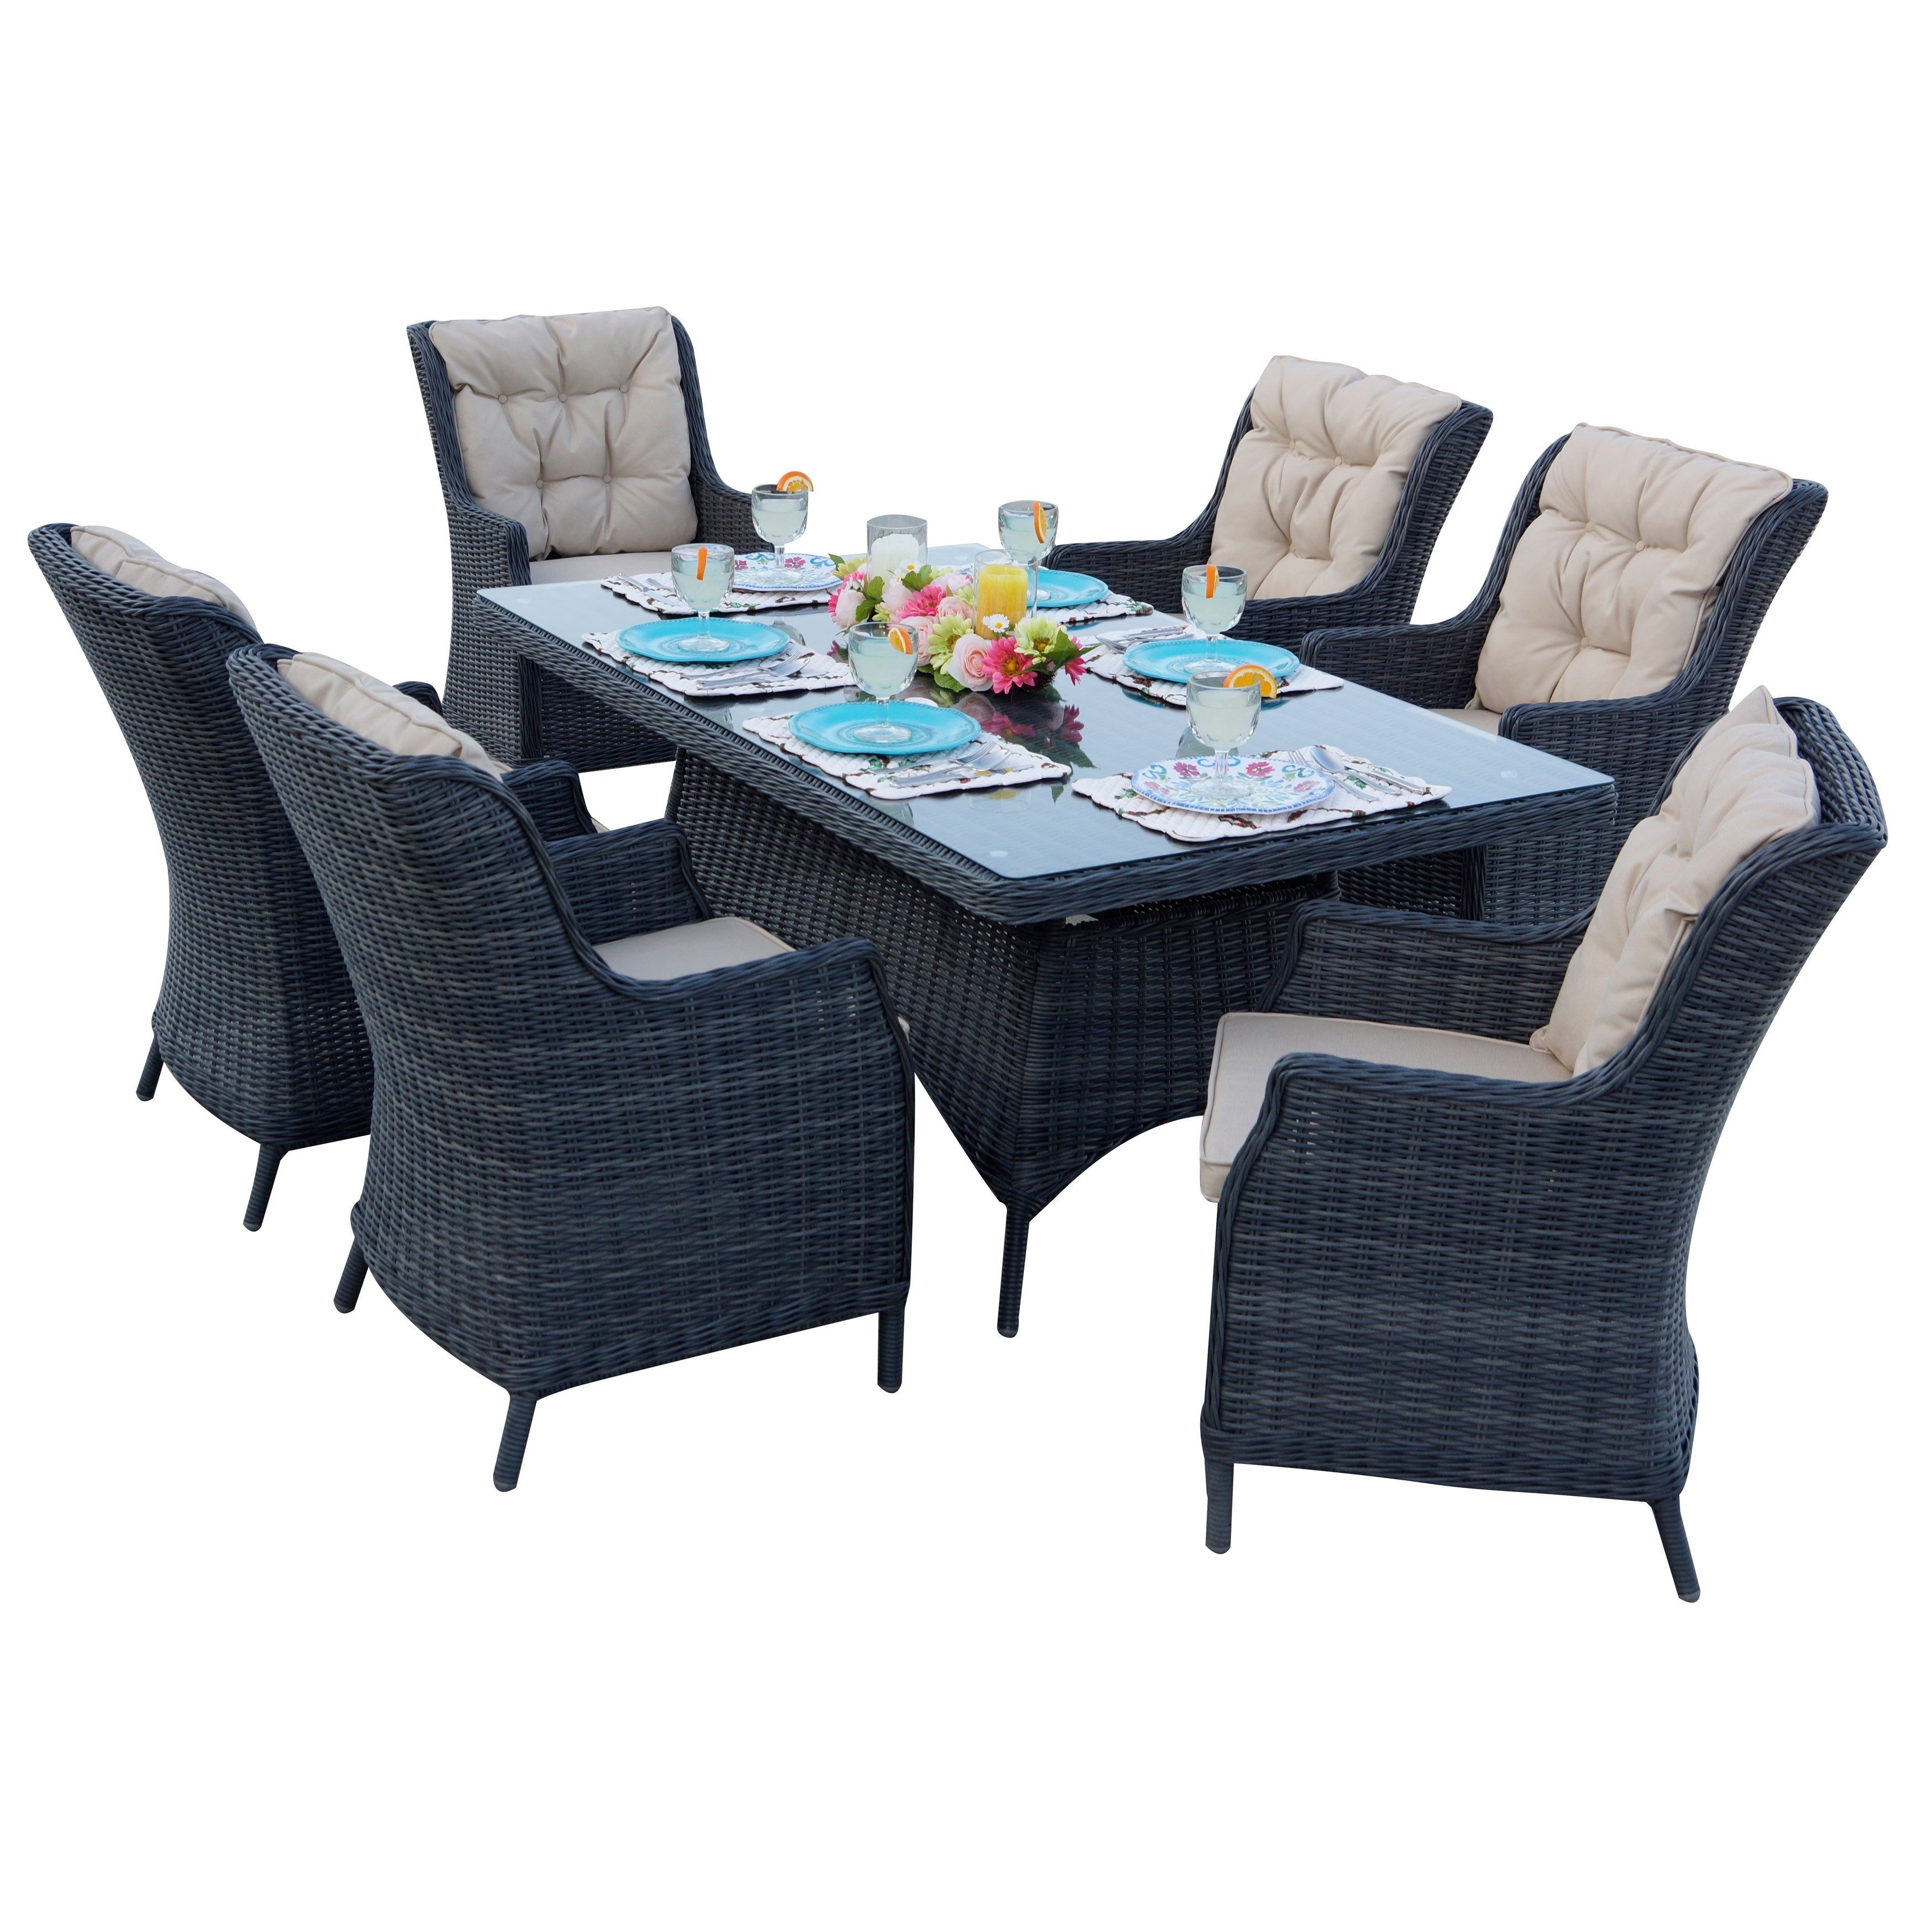 Darlee Valencia Black Resin Wicker Dining Set | Ebay Within Most Up To Date Valencia 72 Inch 6 Piece Dining Sets (View 5 of 20)